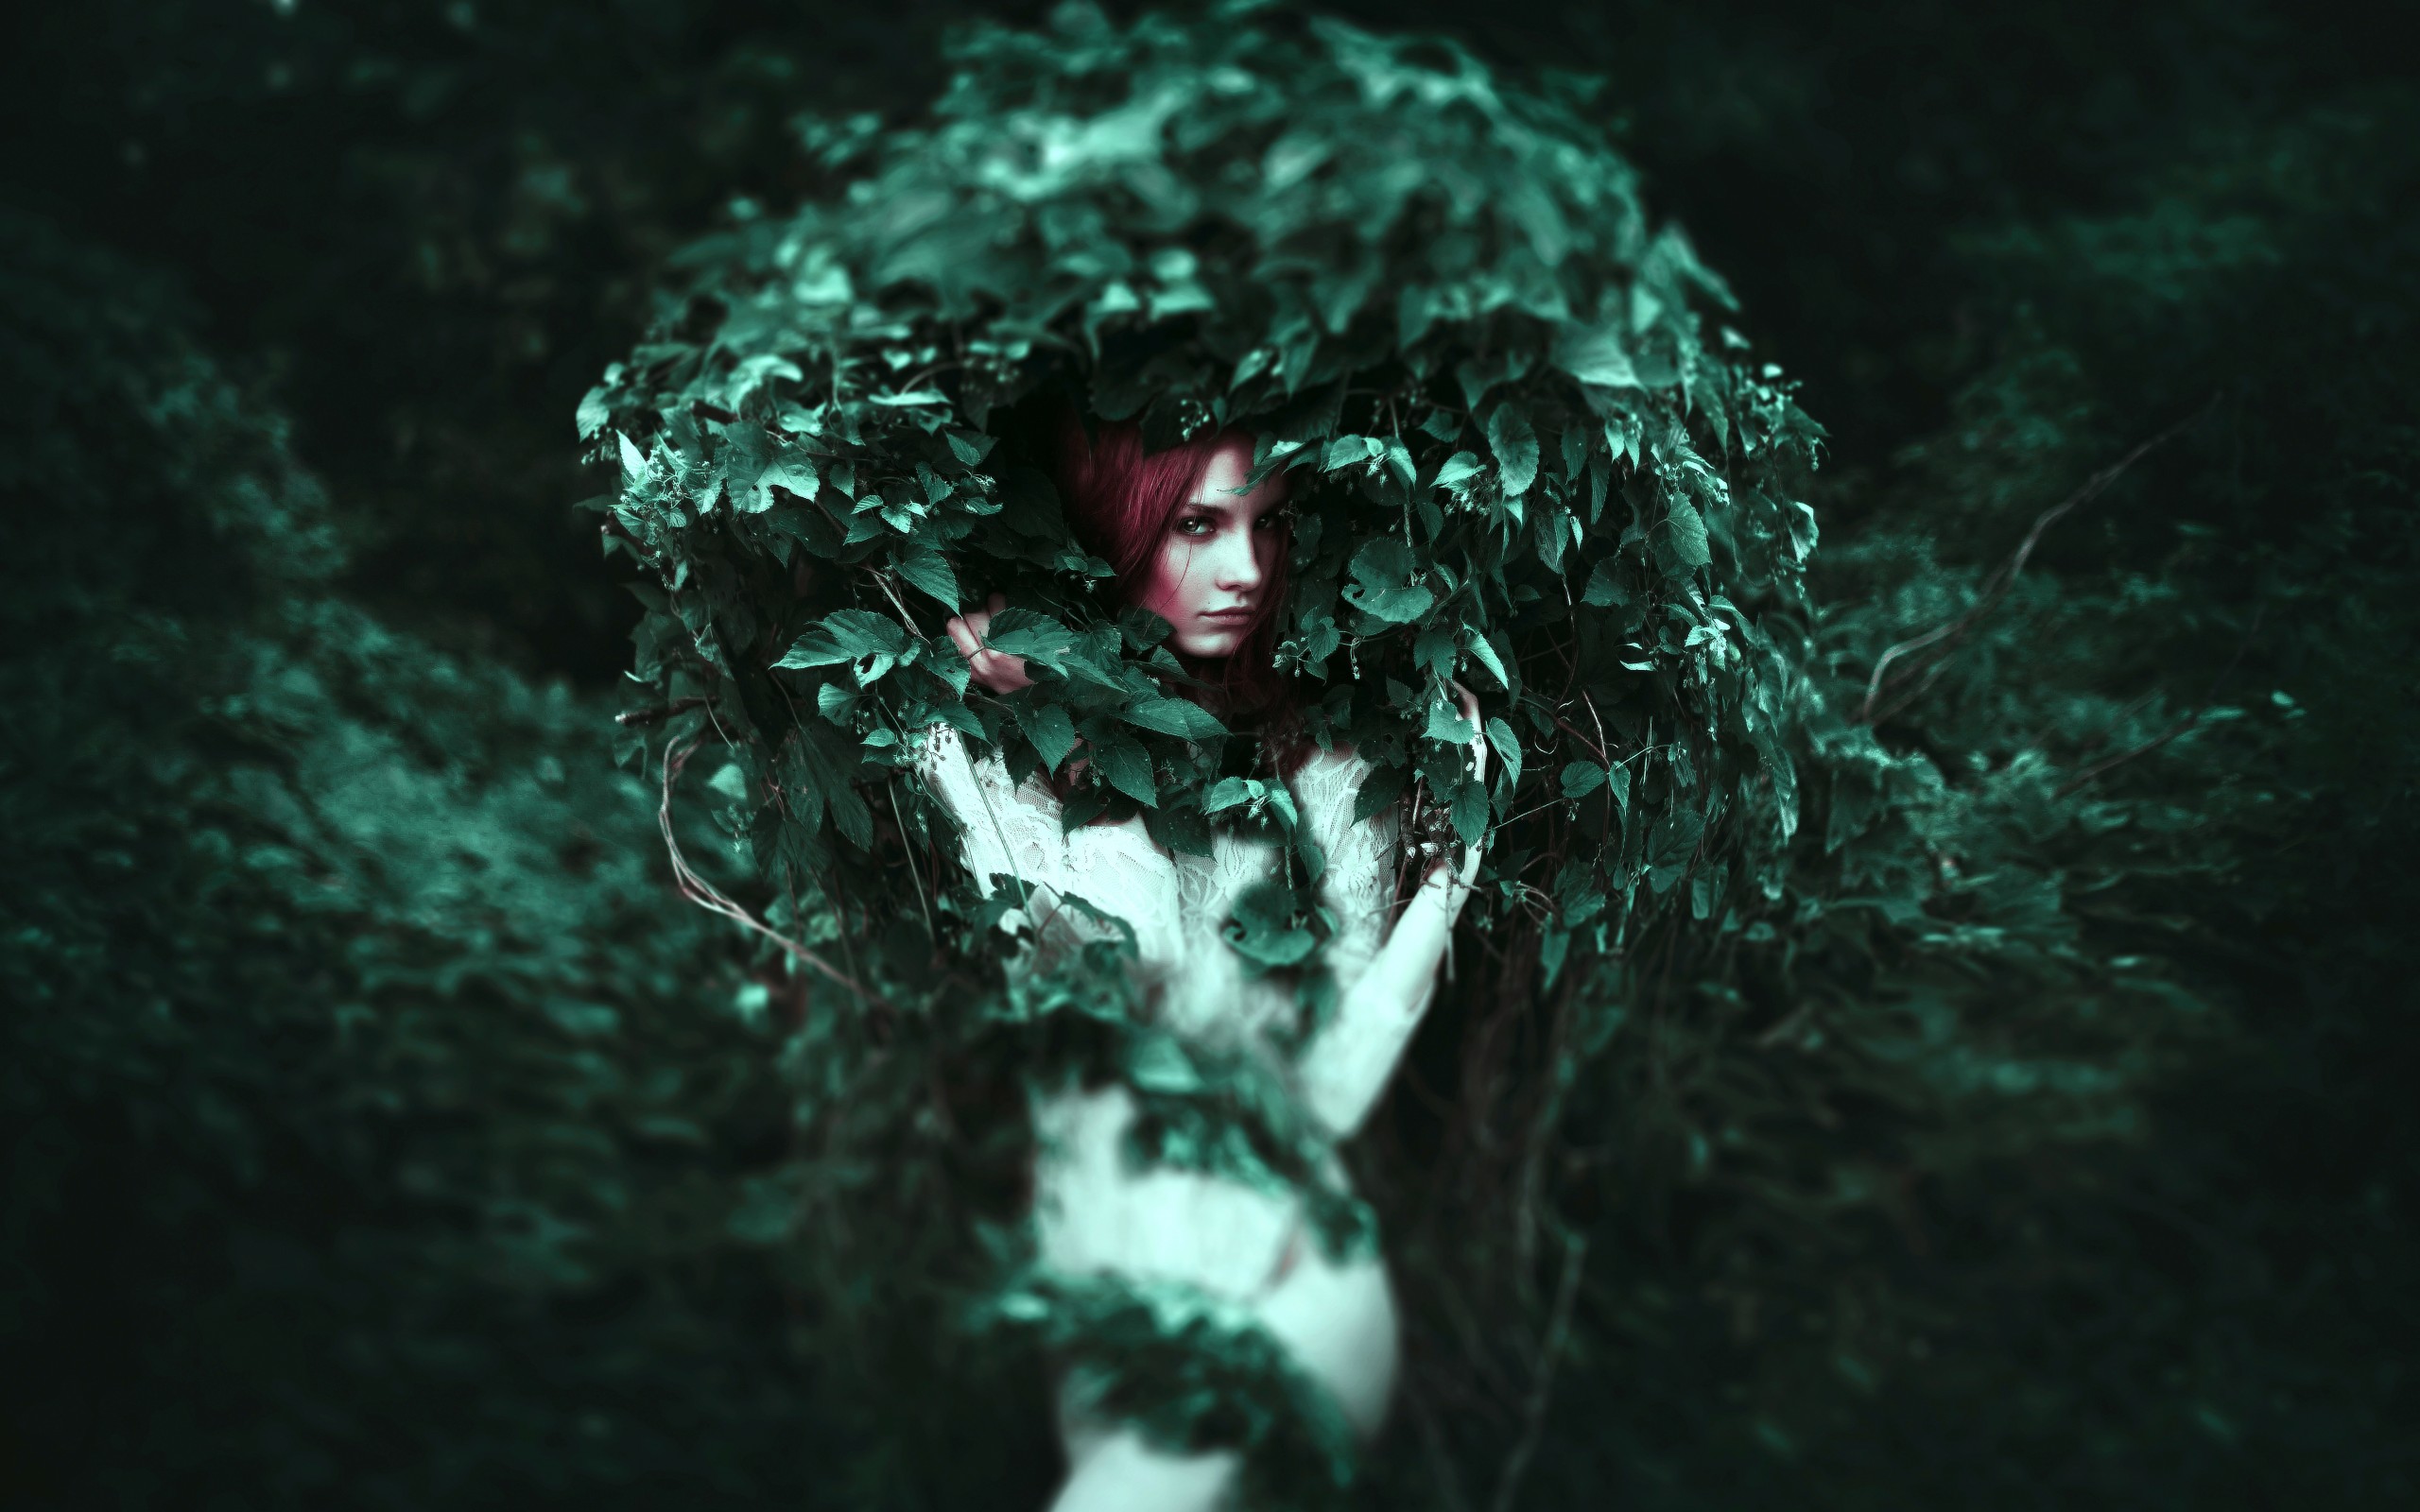 Green Leaves Women Nature Women Outdoors Dress Redhead Dyed Hair Looking At Viewer Centered White Dr 2560x1600